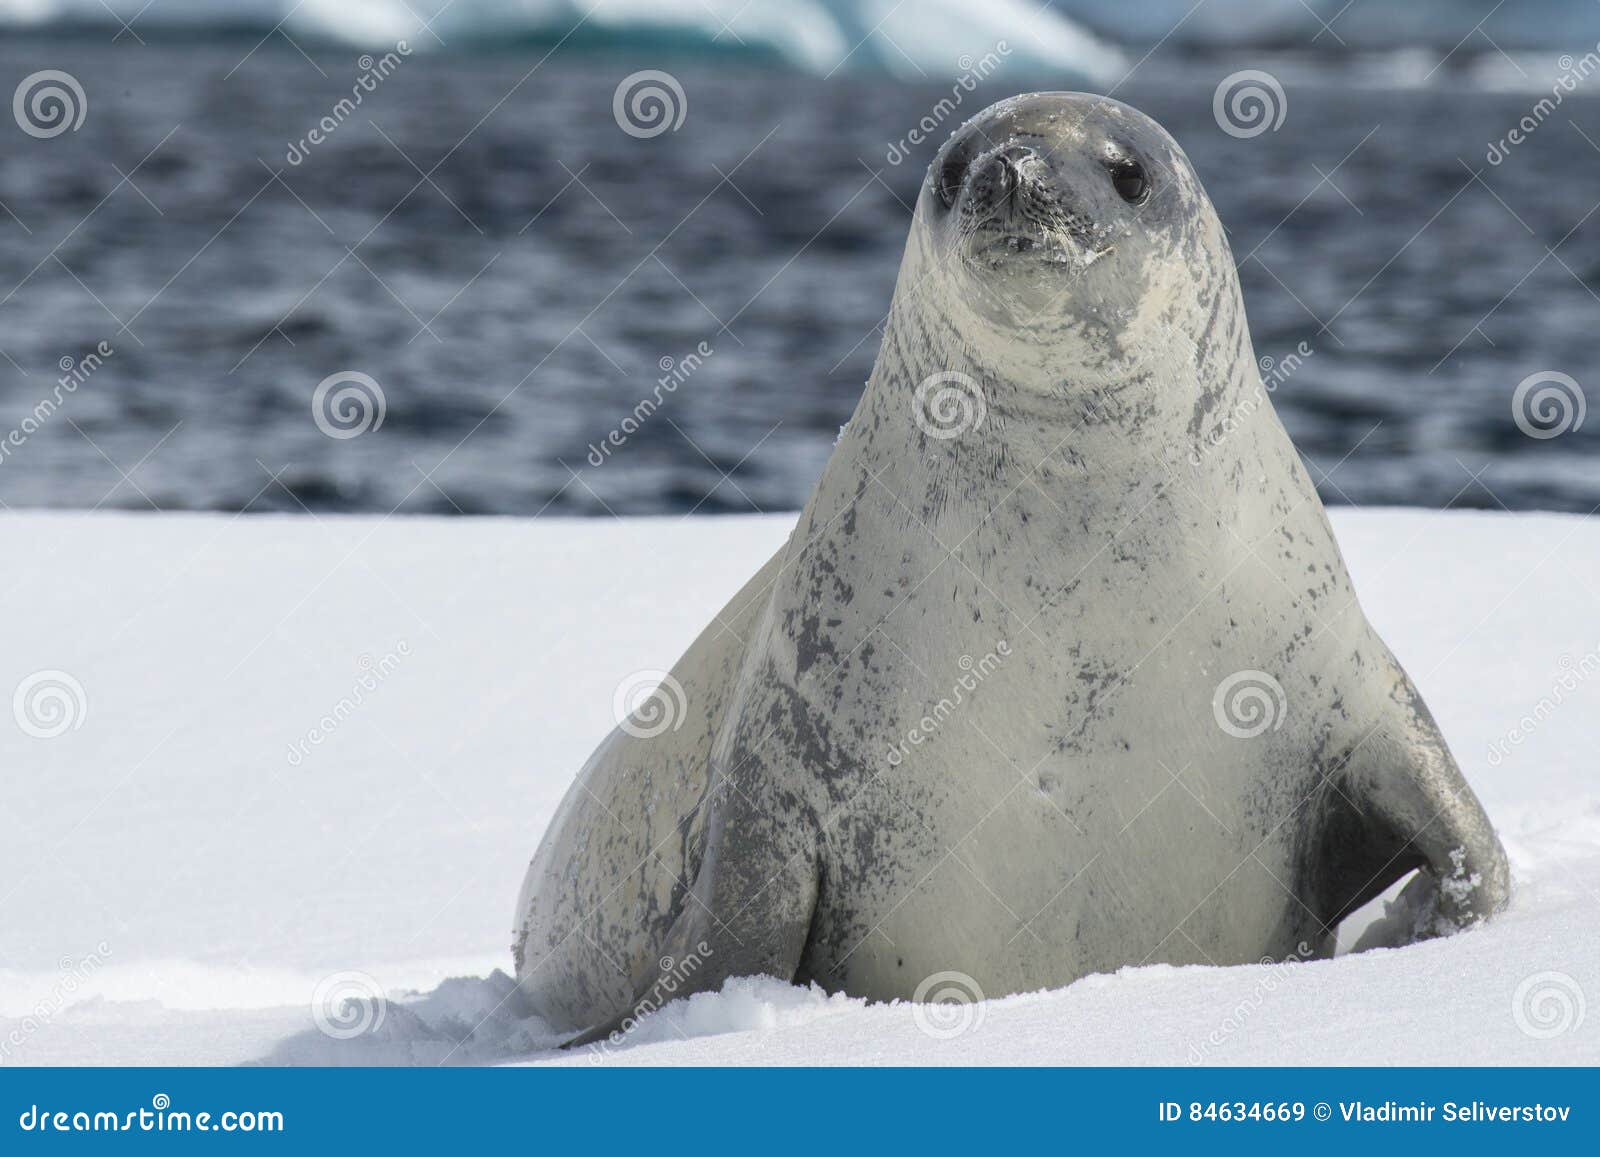 crabeater seals on the ice.